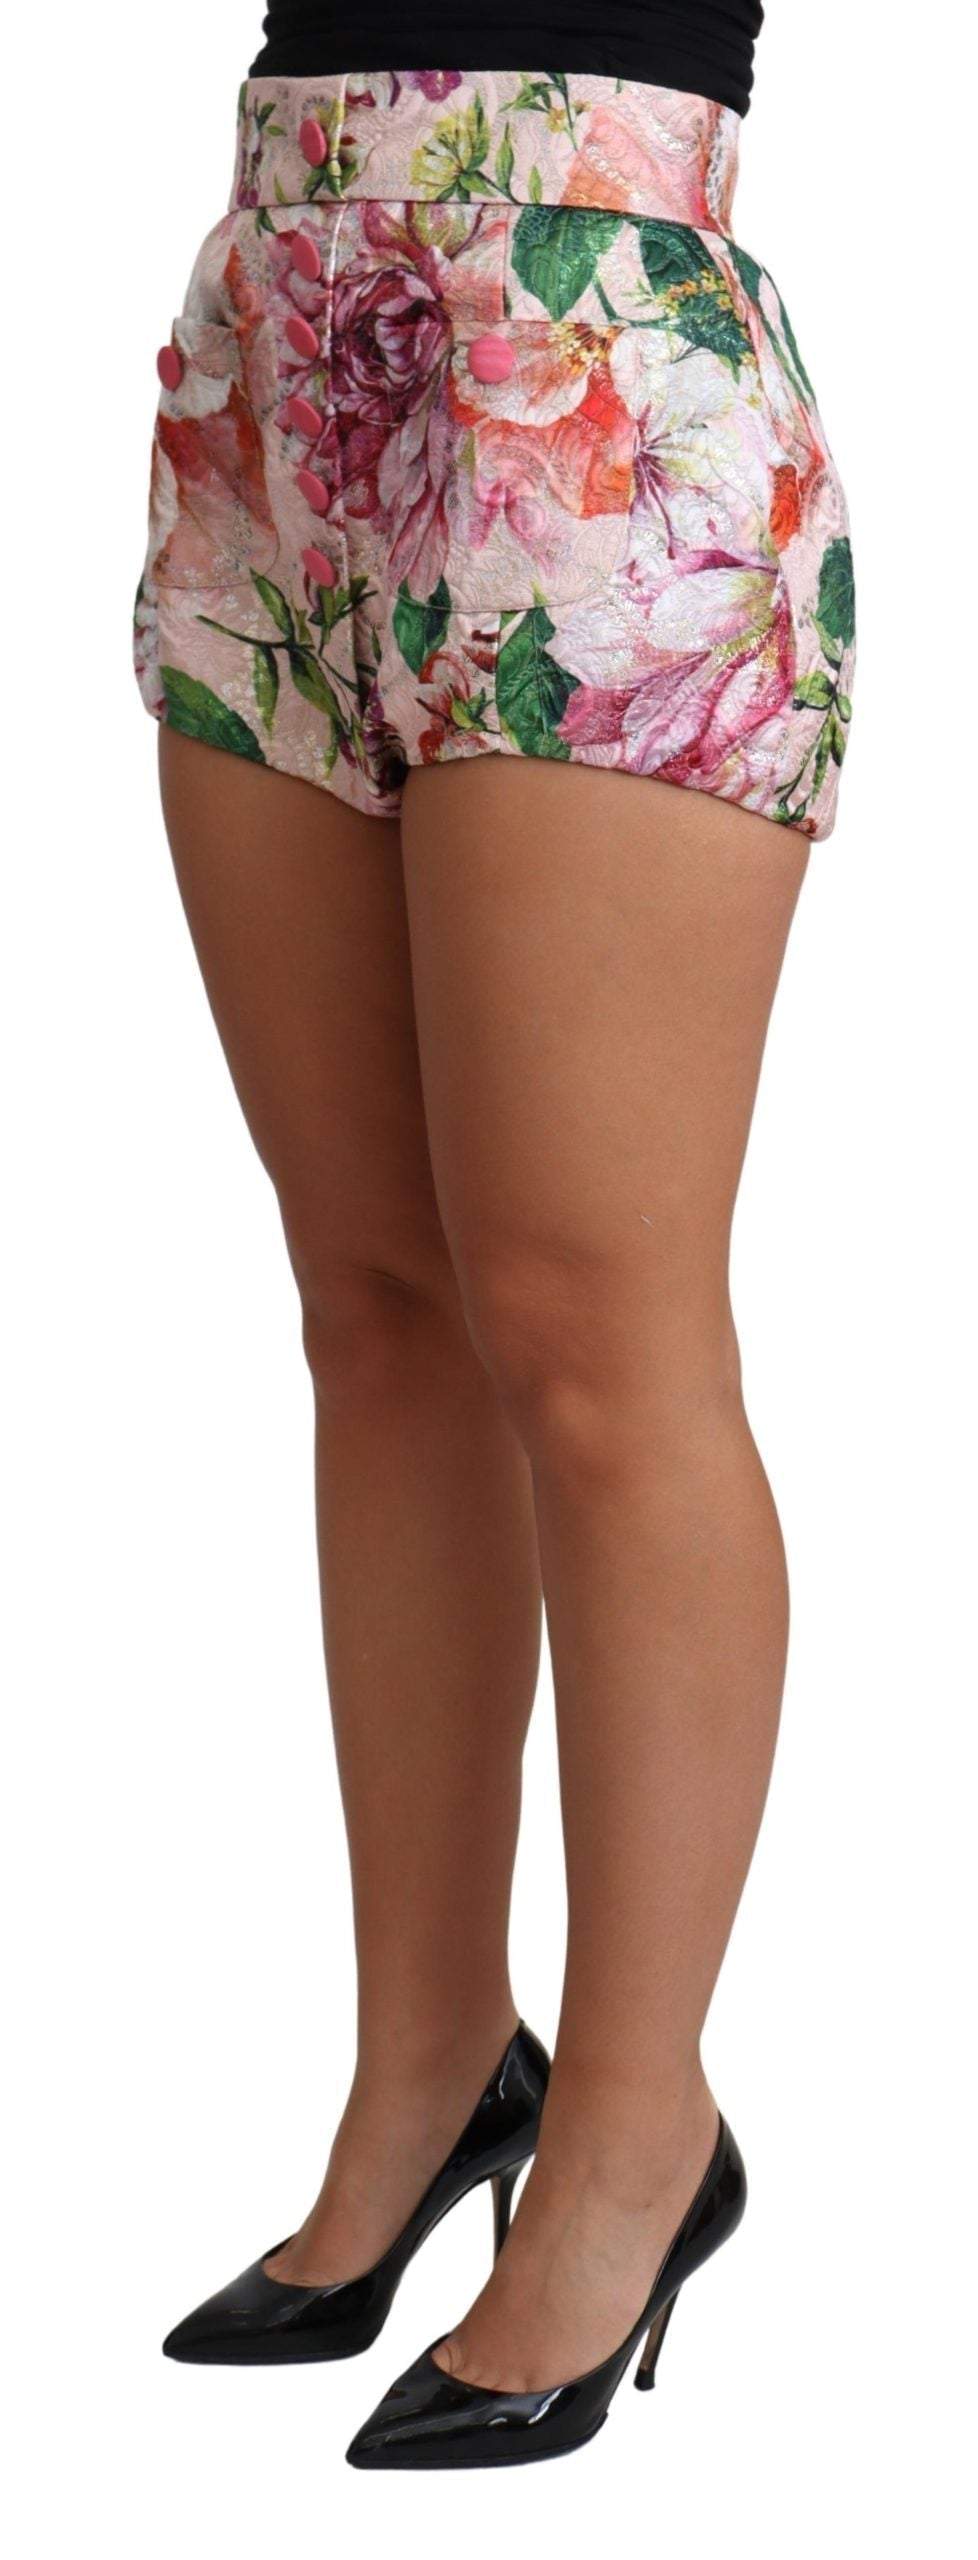 Dolce & Gabbana Pink Cotton Floral Print Hot Pants Short #women, Dolce & Gabbana, feed-agegroup-adult, feed-color-Pink, feed-gender-female, IT38|XS, IT40|S, IT42|M, IT44|L, Jeans & Pants - Women - Clothing, Pink, Women - New Arrivals at SEYMAYKA